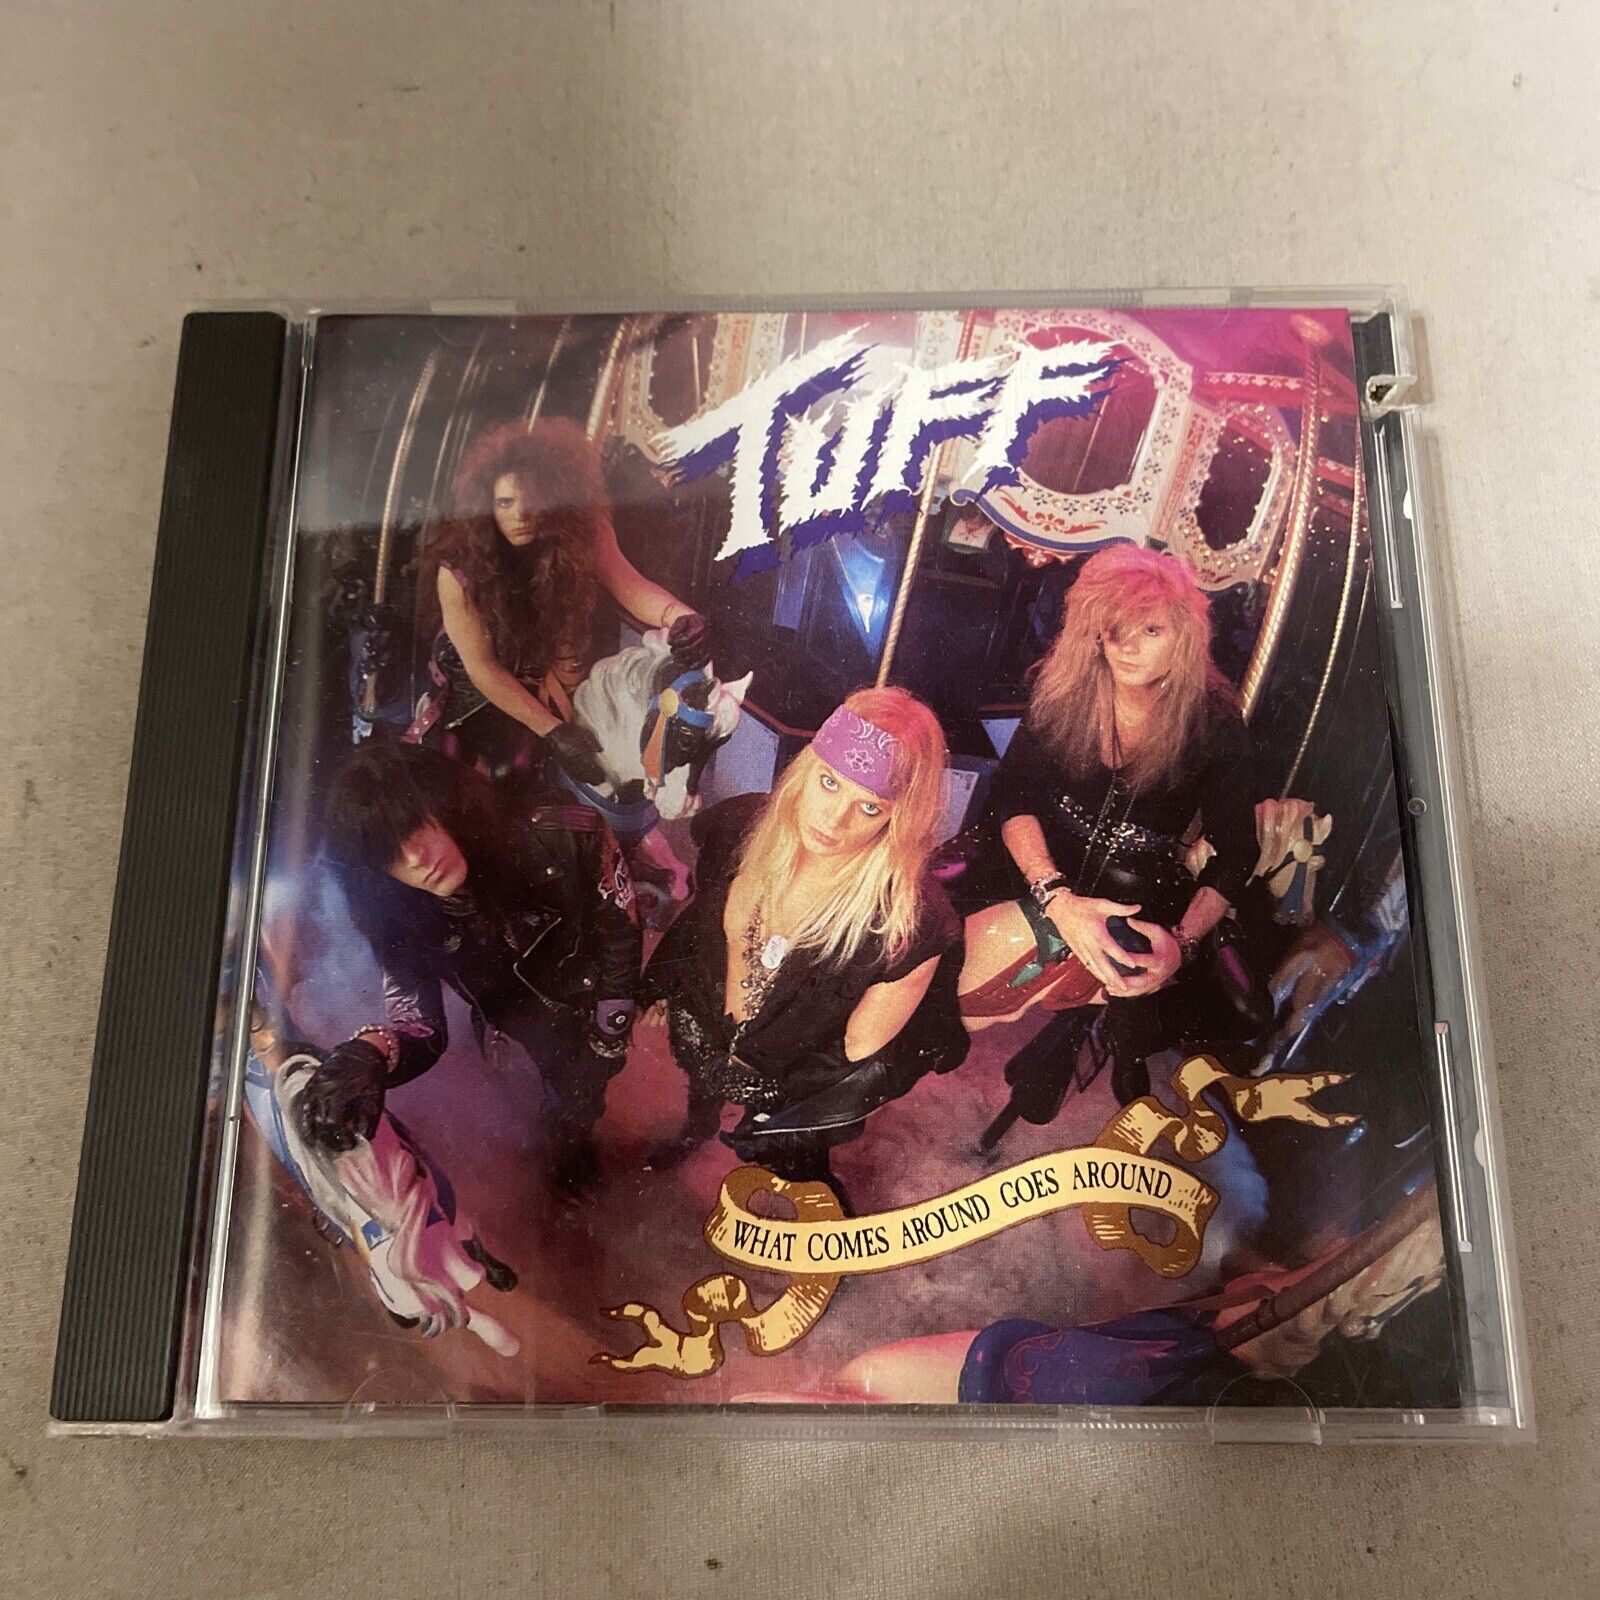 What Comes Around Goes Around by Tuff (CD, May-1991, Atlantic) - READ